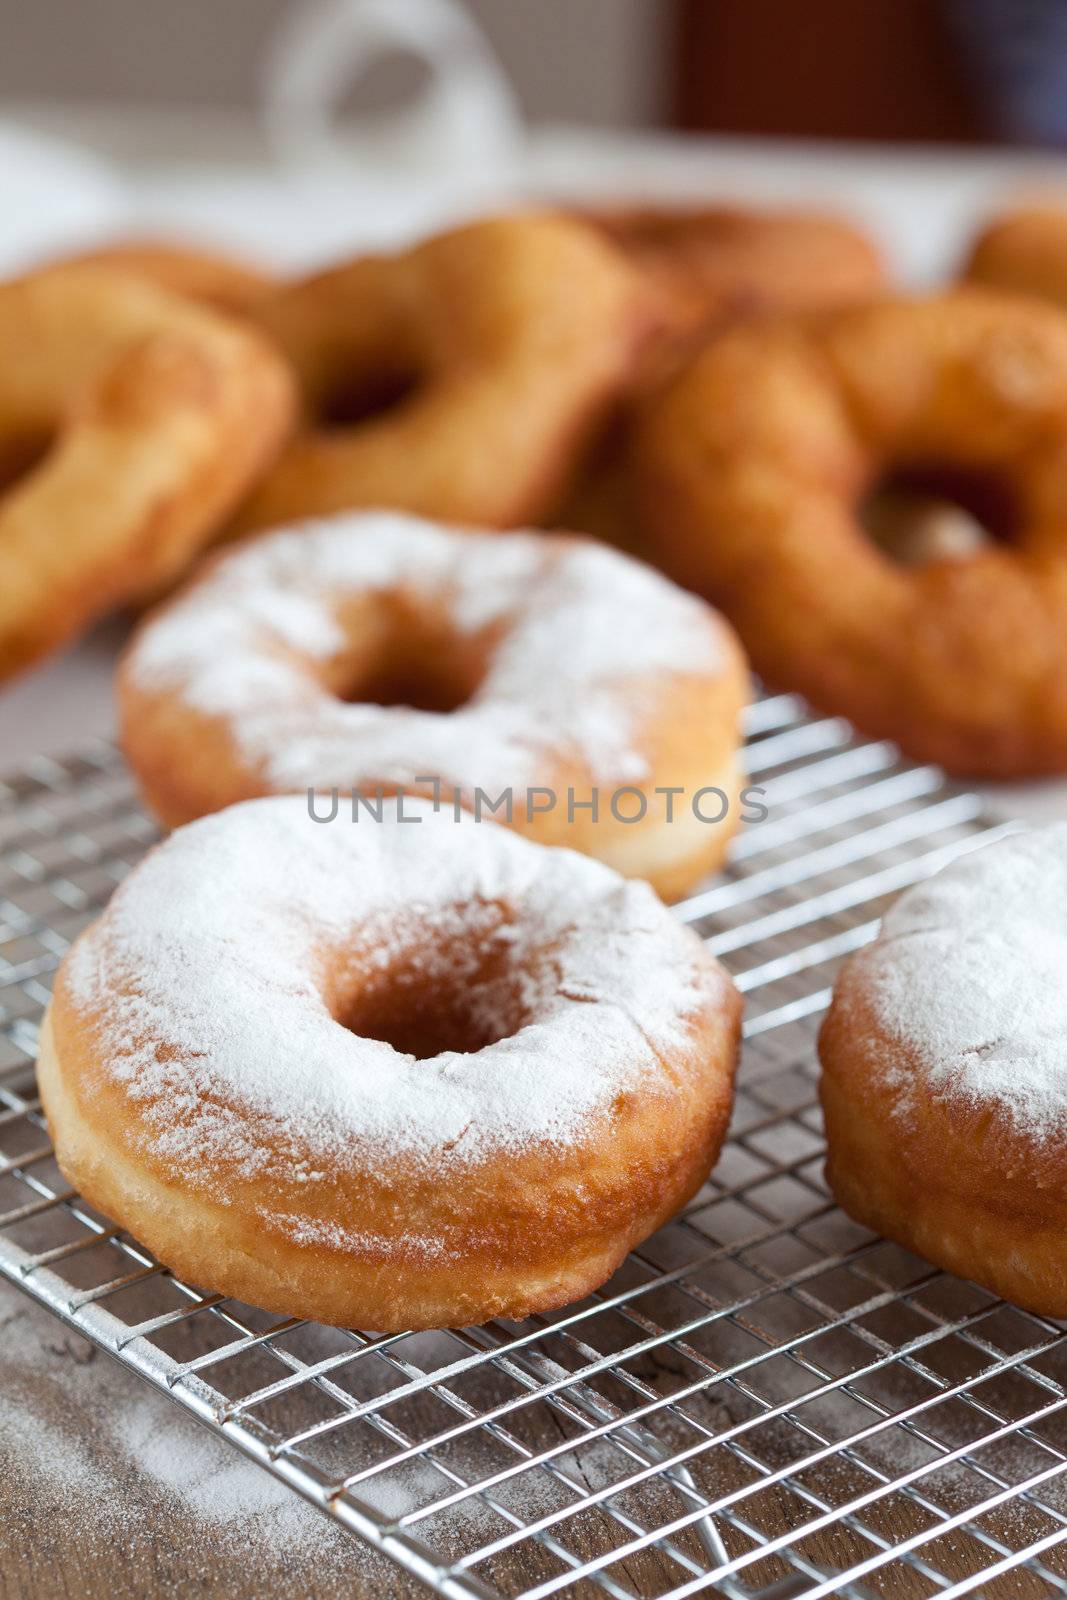 Freshly baked doughnuts sprinkled with icing sugar